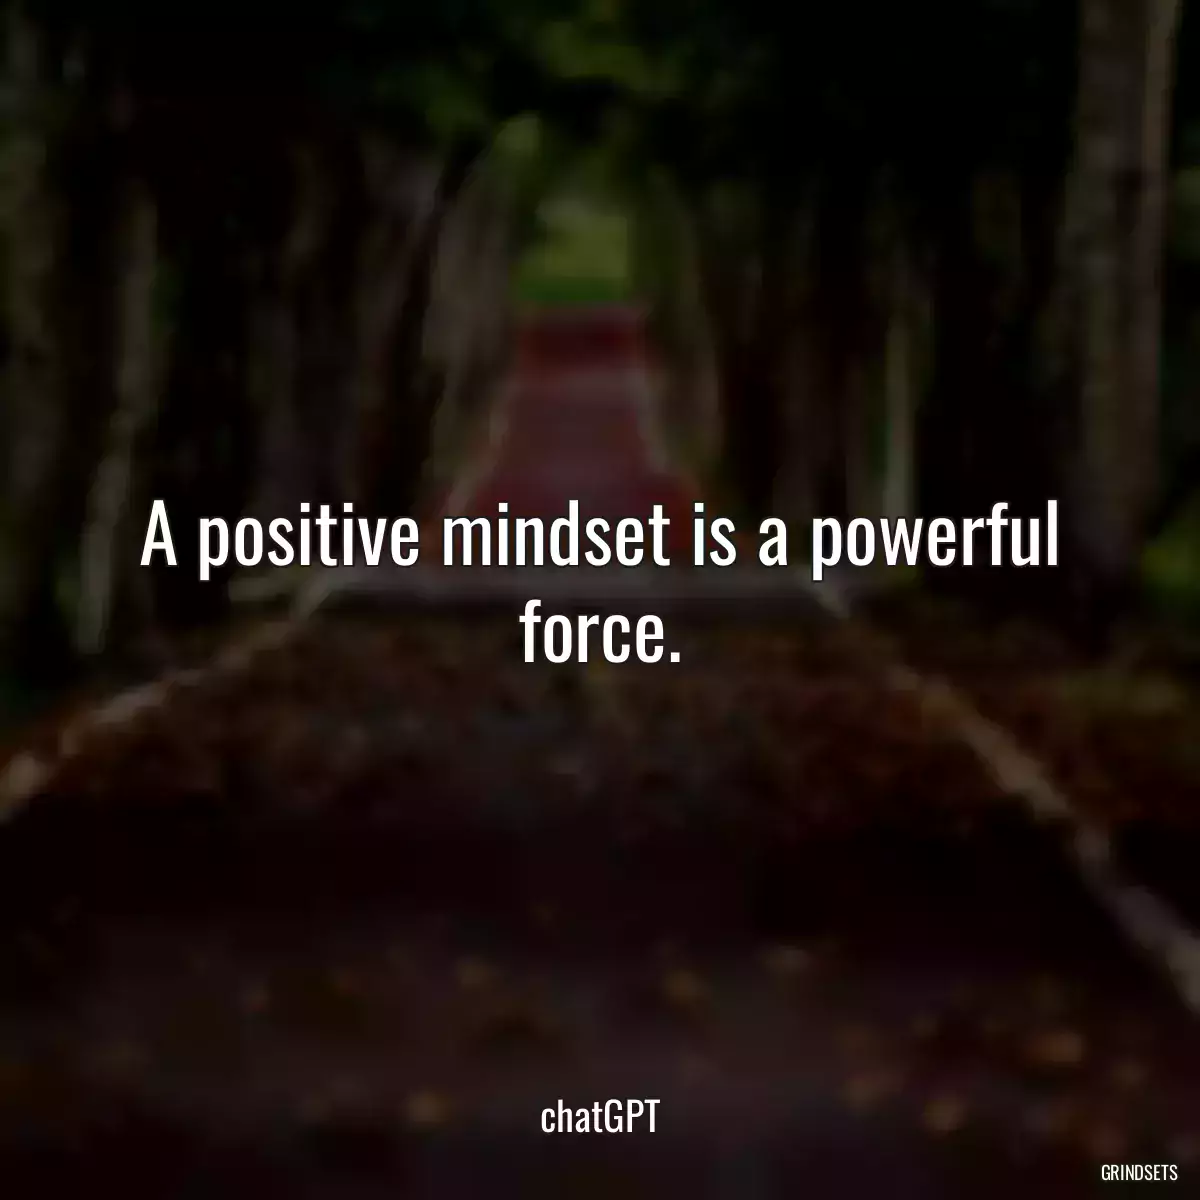 A positive mindset is a powerful force.